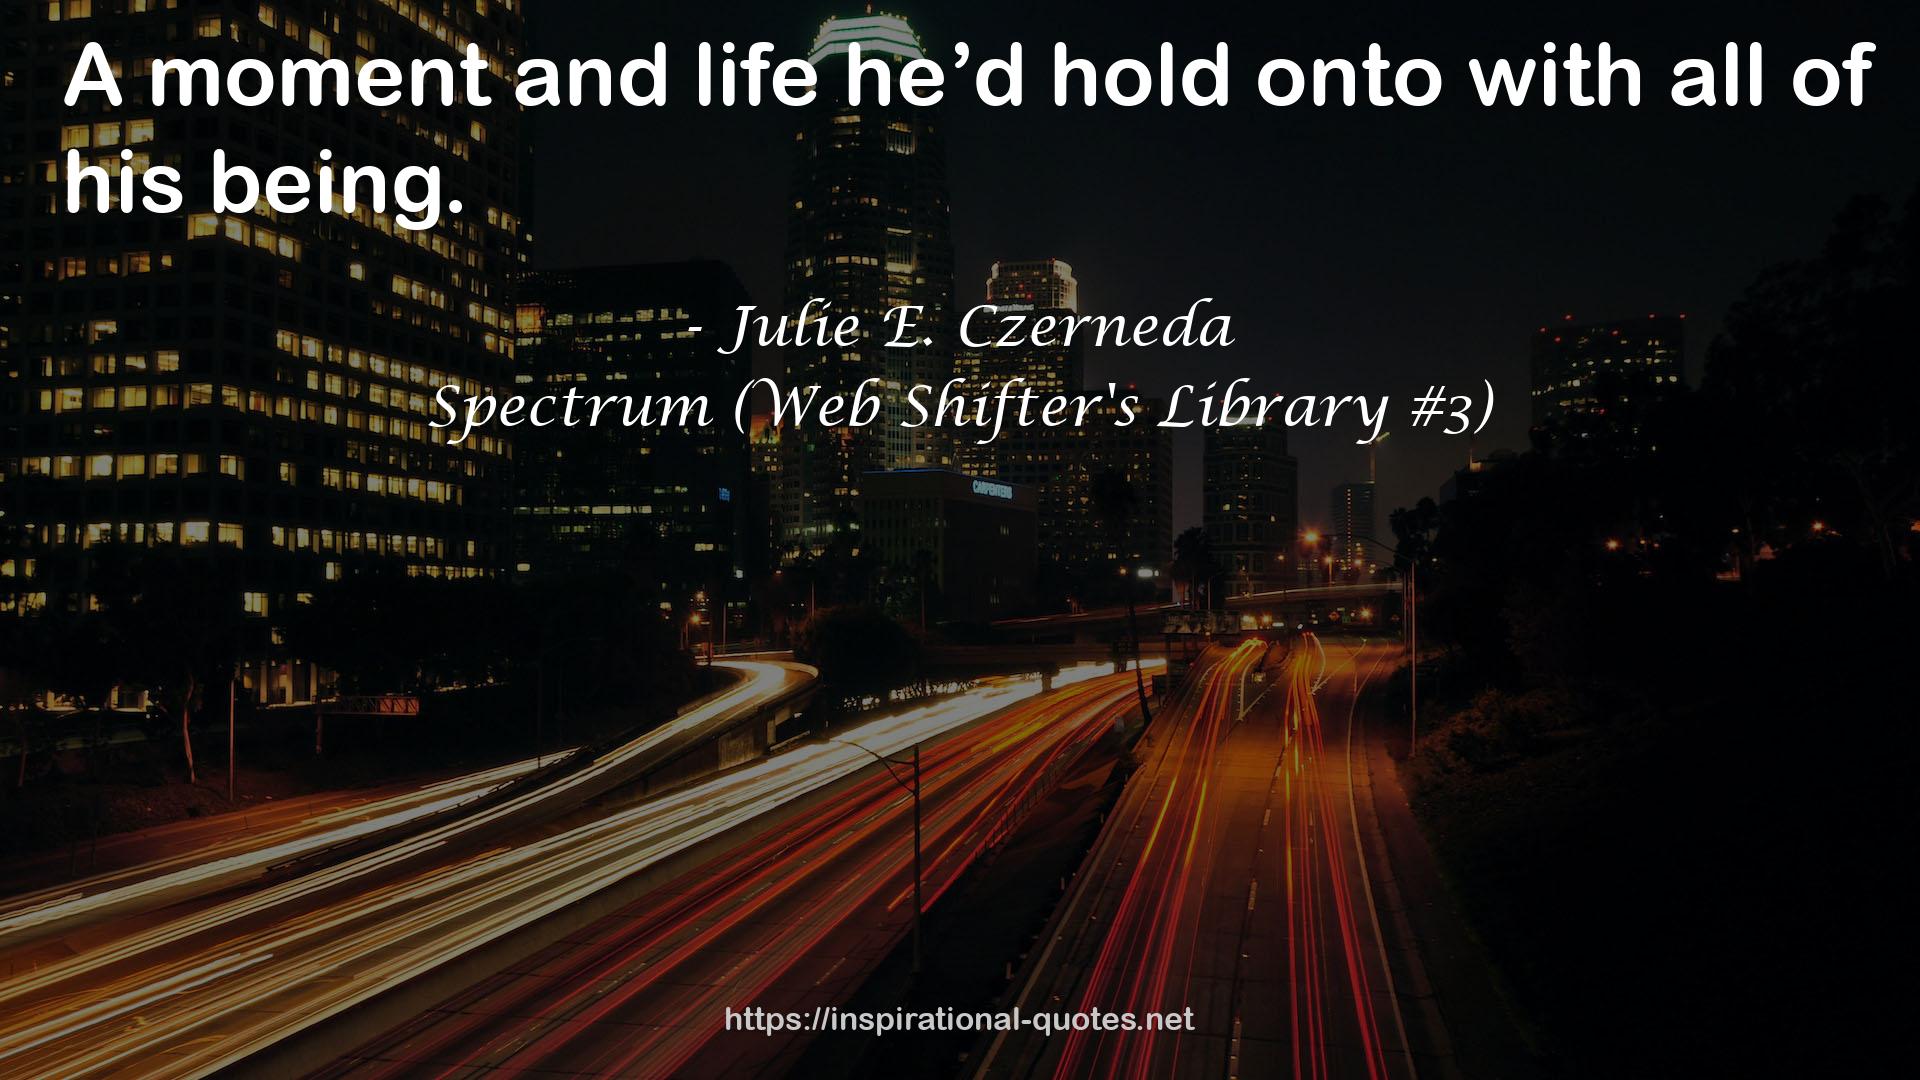 Spectrum (Web Shifter's Library #3) QUOTES